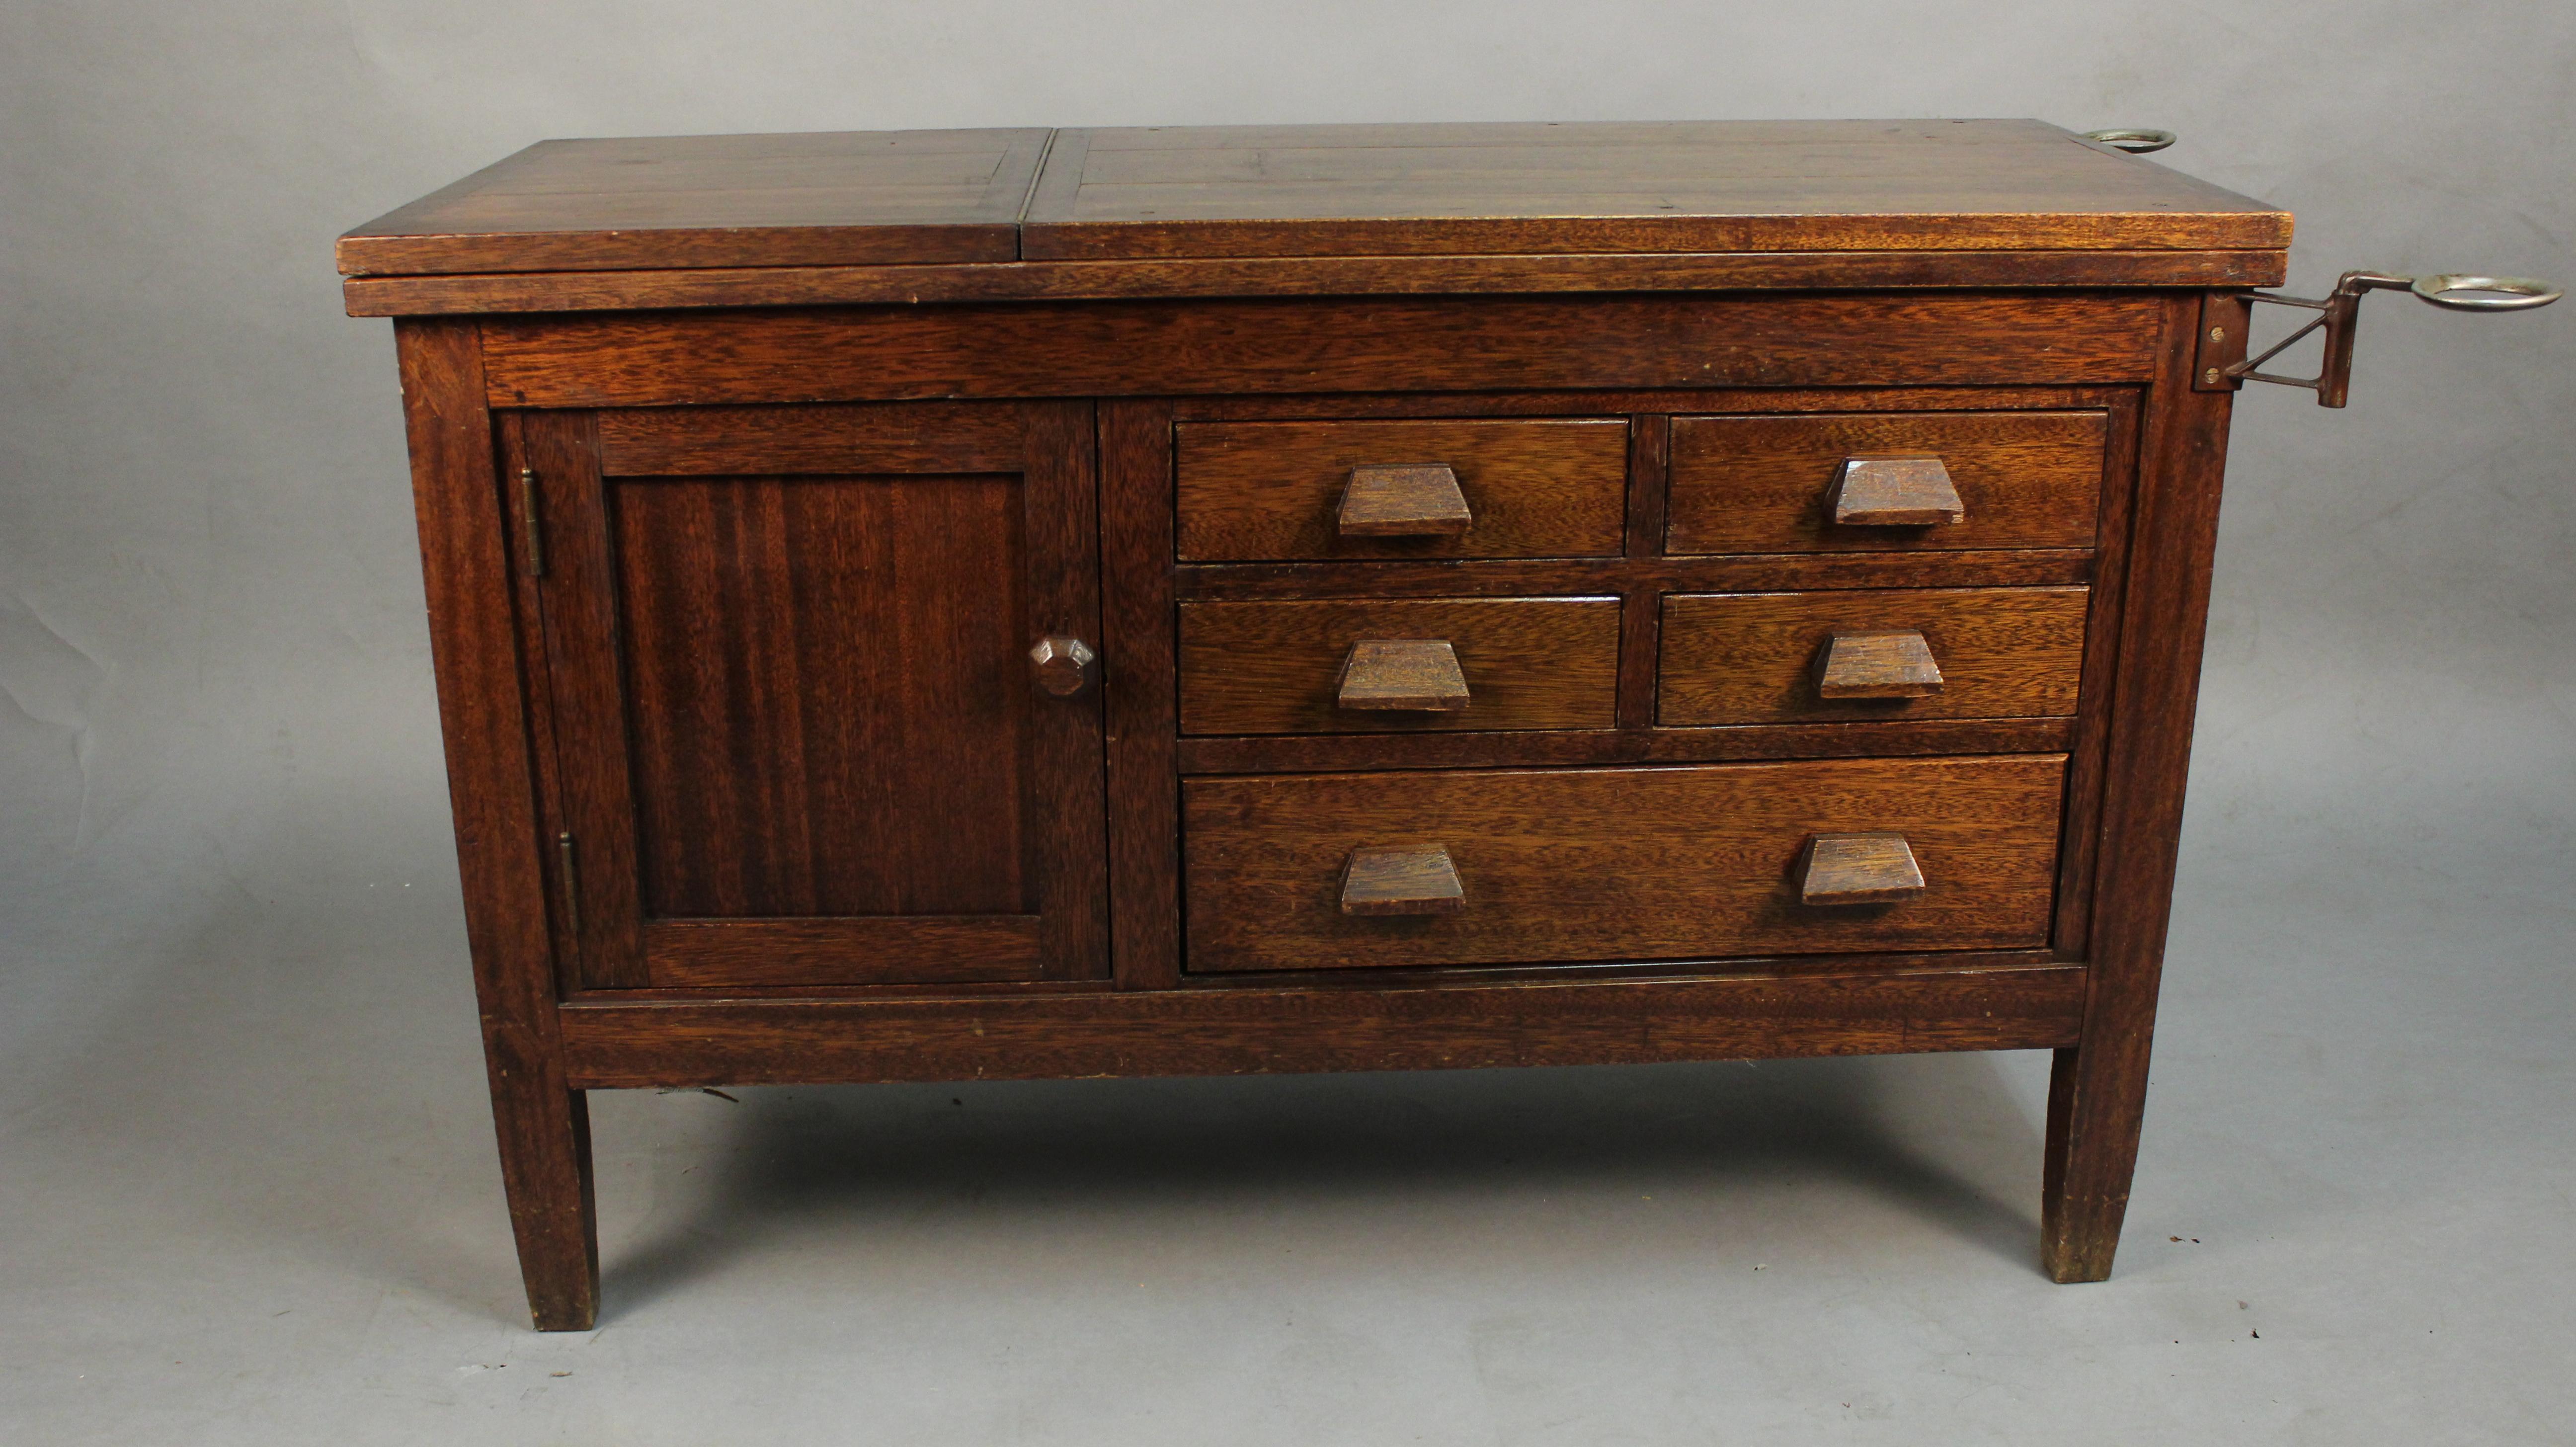 Examining table, drawers and doors on both sides, circa 1910. Top tilts up. Measures: 31.5